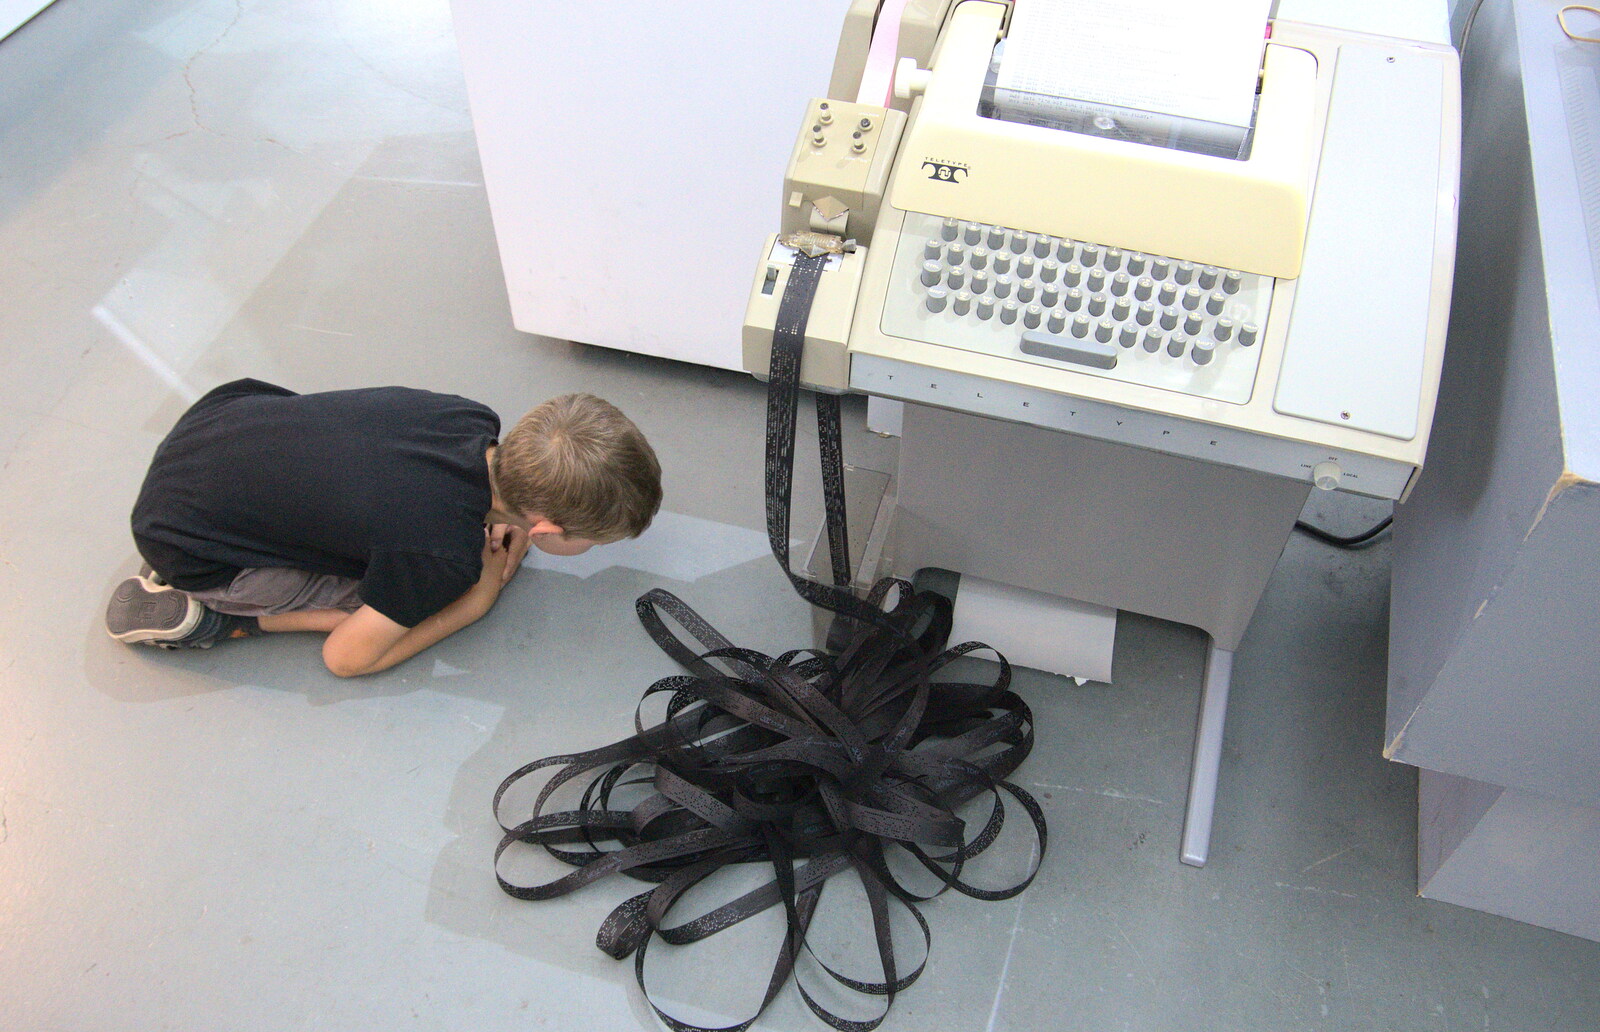 Fred is fascinated by a punched tape reader from The Retro Computer Festival, Centre For Computing History, Cambridge - 15th September 2018